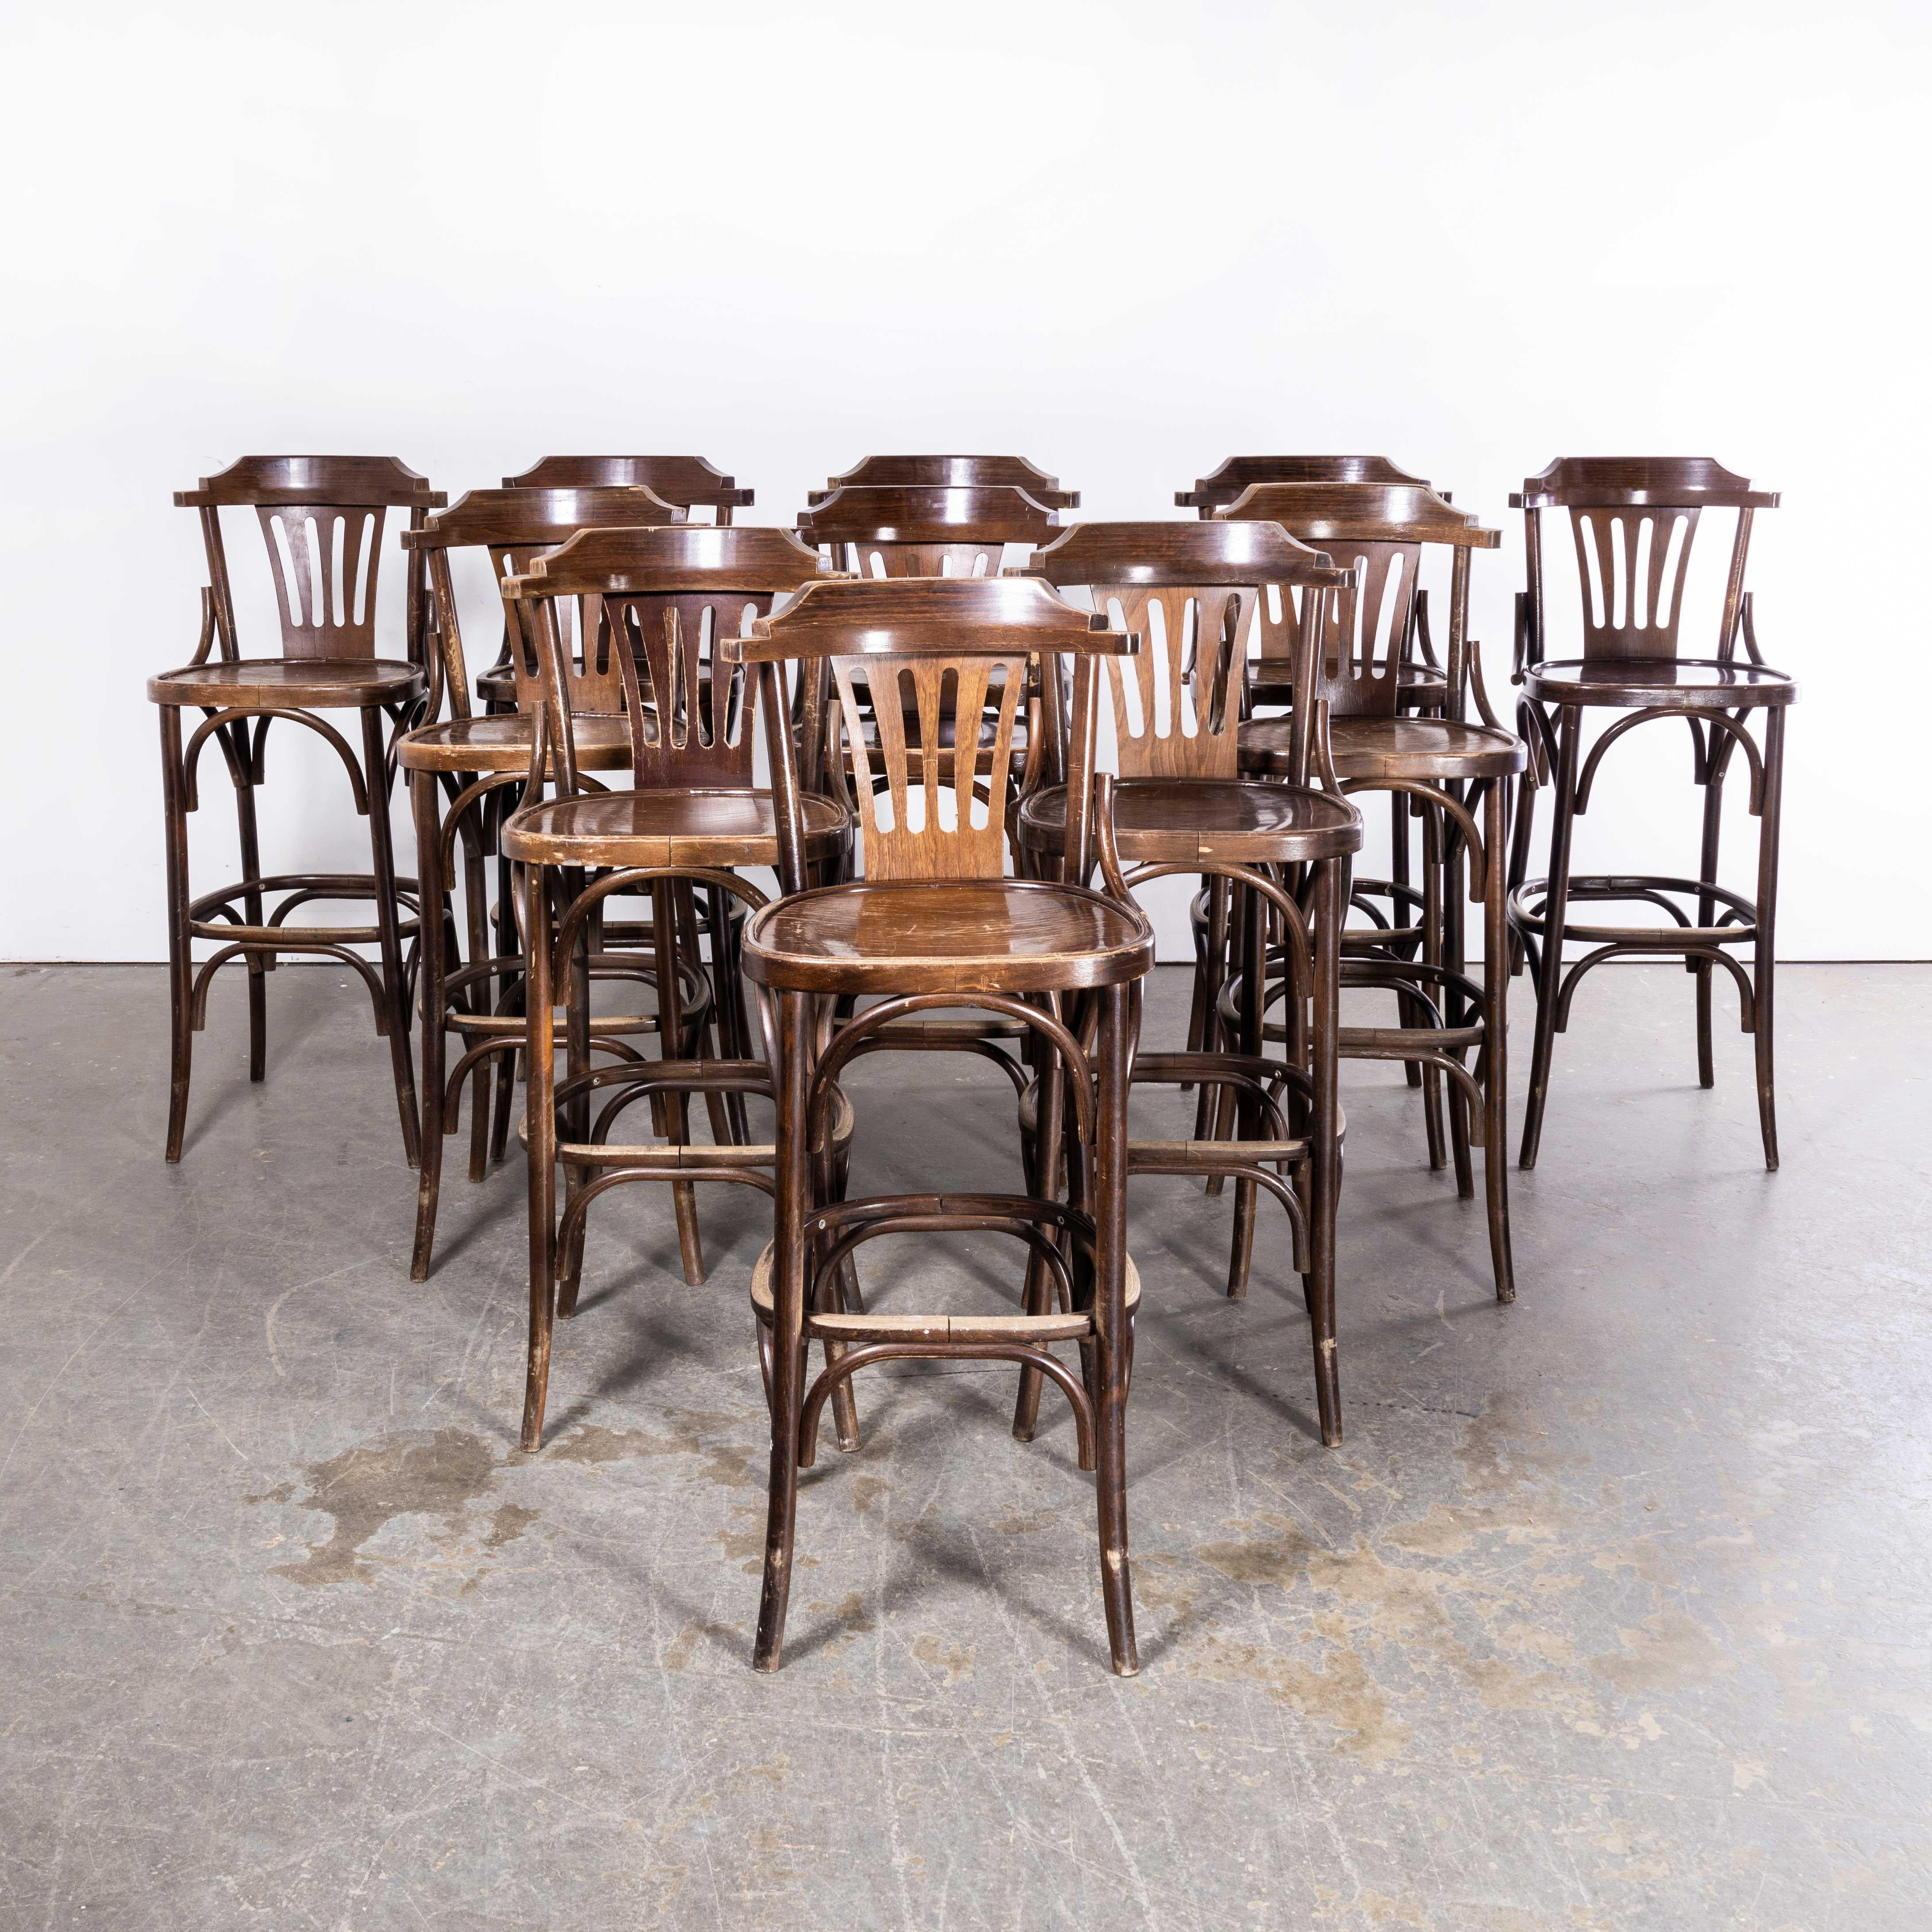 1970’s Classic High Back Bentwood Bar Chairs With Arms – Various Quantities Available
1970’s Classic High Back Bentwood Bar Chairs With Arms – Various Quantities Available. These high bar chairs were produced by the famous Czech firm Ton, a post war